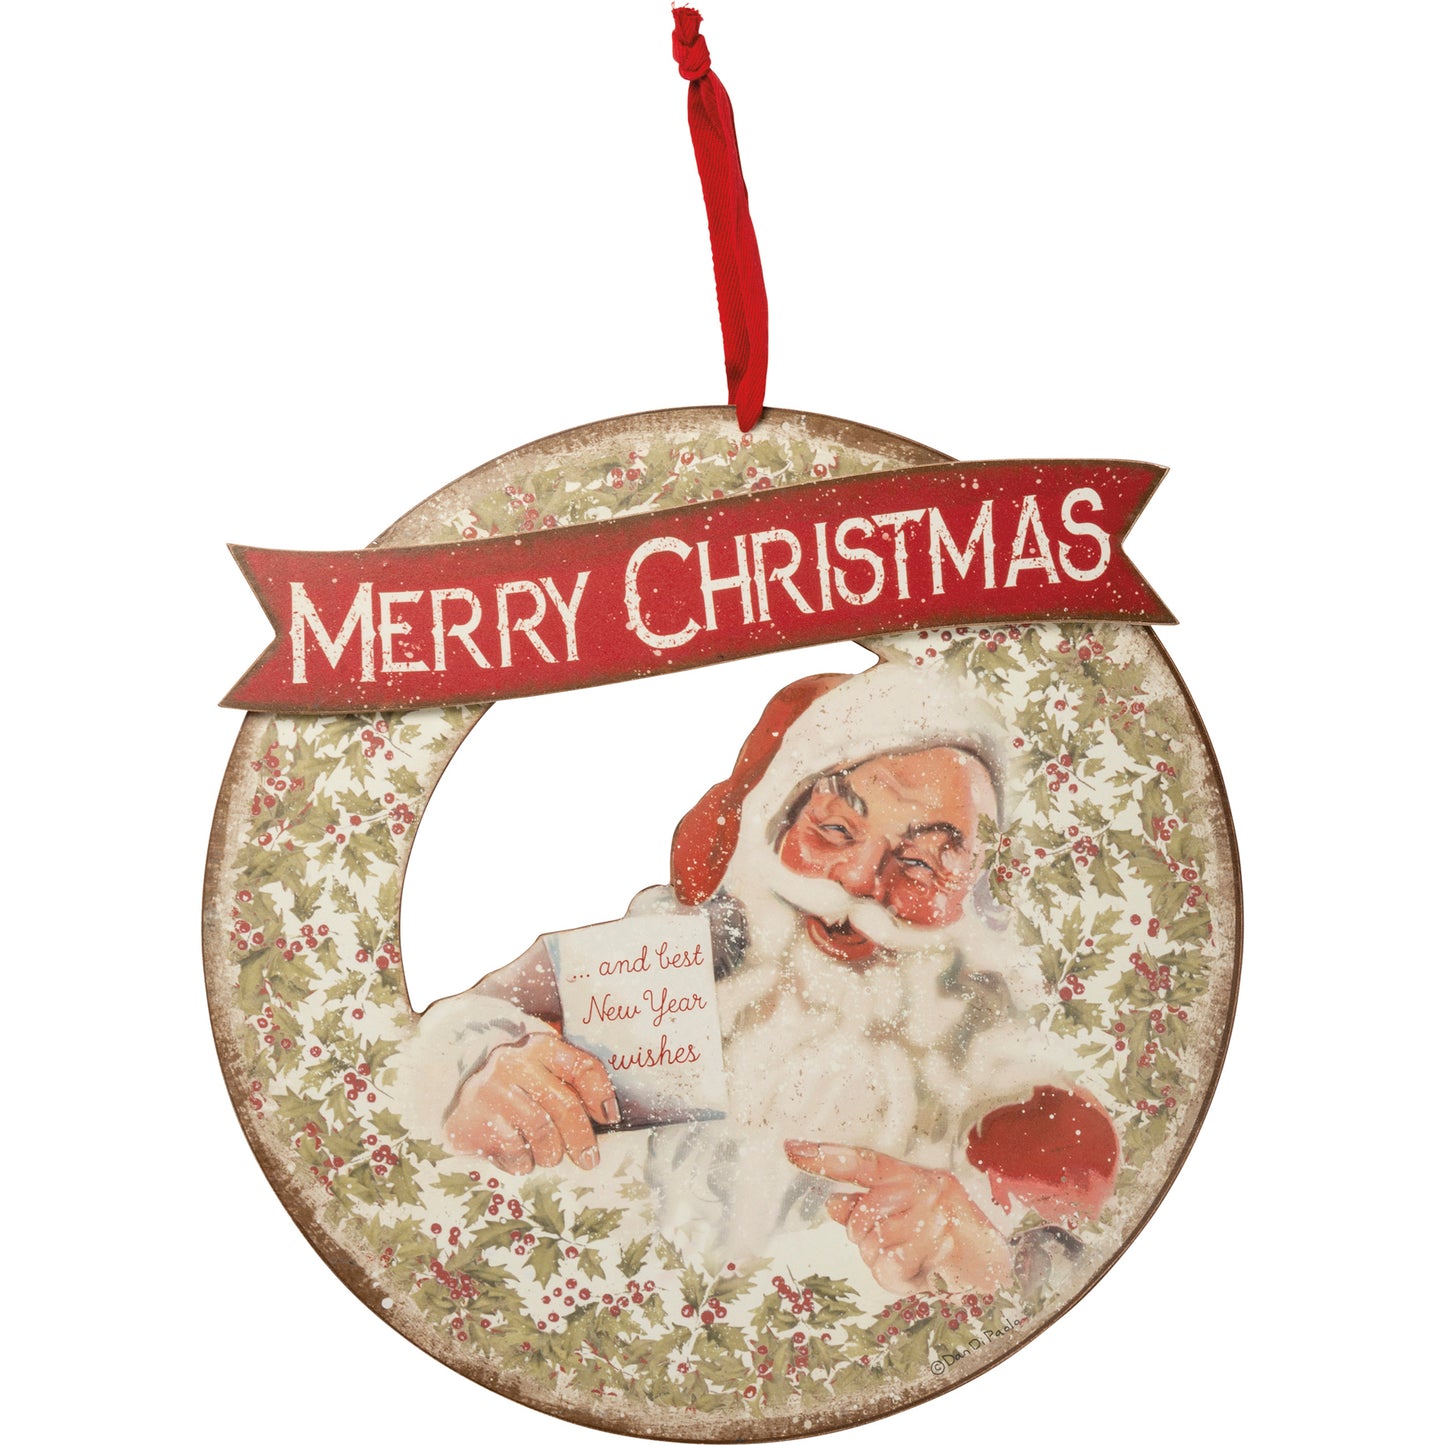 Die Cut Vintage-Style Wooden Christmas Wreath Santa Christmas & New Year Wishes